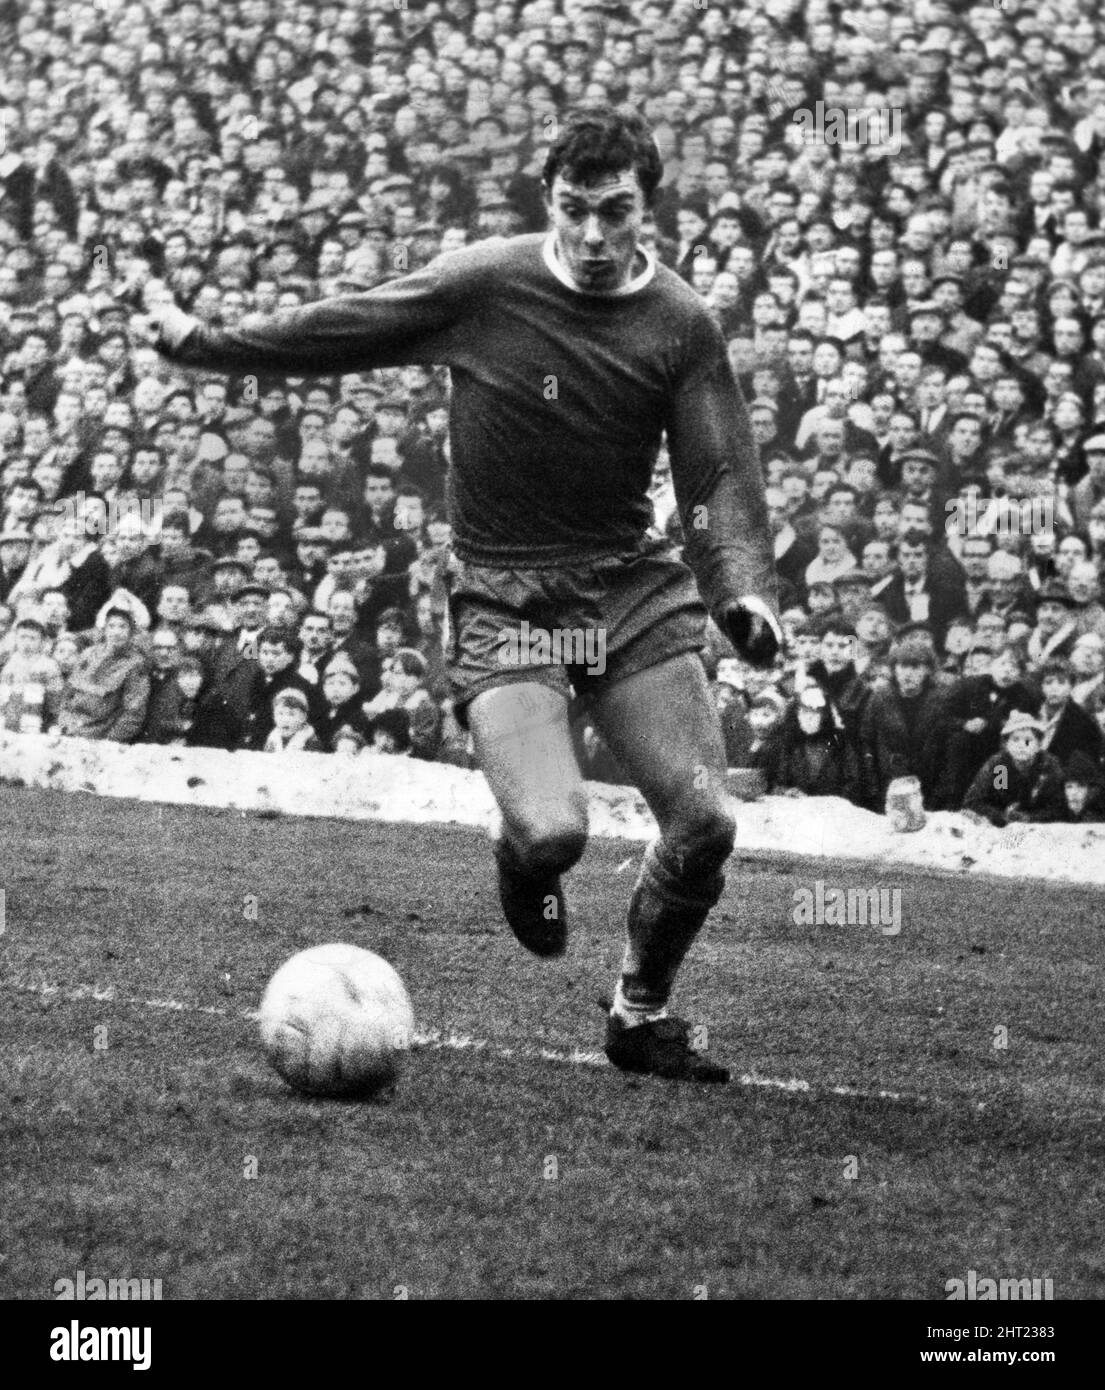 Denis Thwaites, Birmingham City Football Player, in action, league match against Portsmouth at St Andrews, Saturday 18th September 1965. Final score, Birmingham 1-3 Portsmouth. Stock Photo